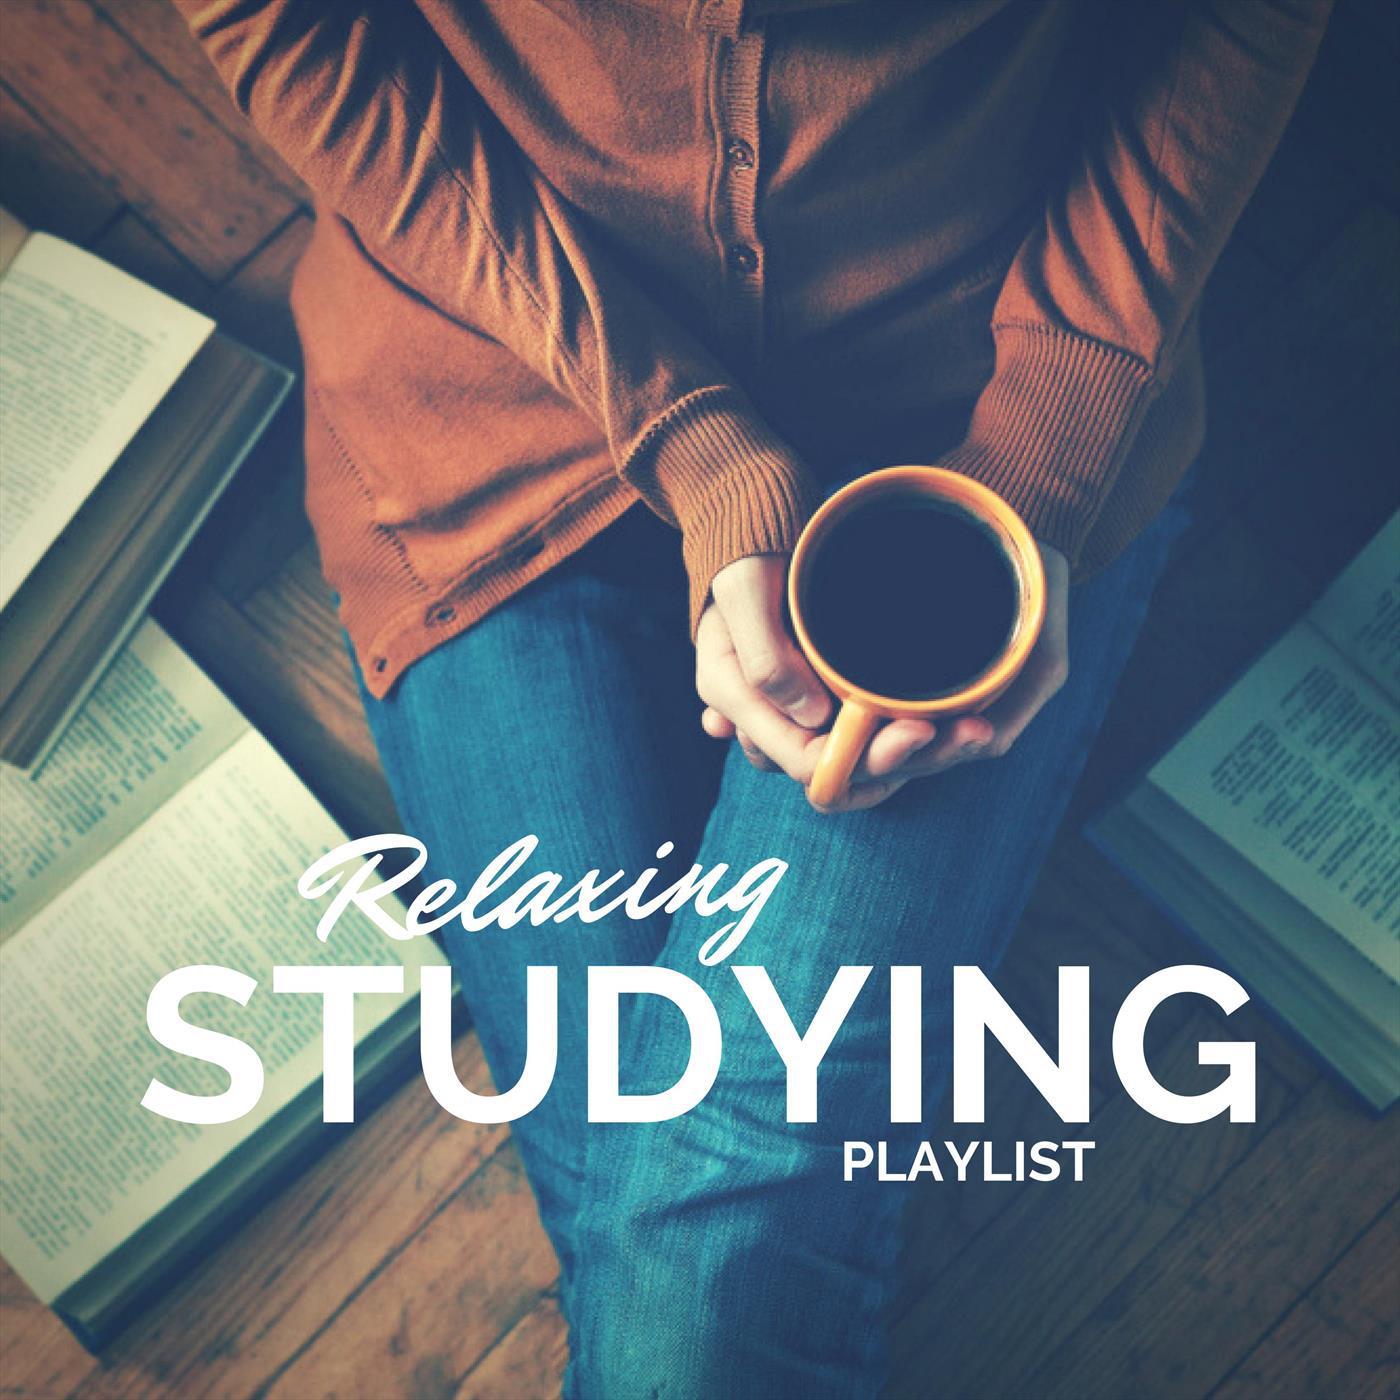 Relaxing Studying Playlist